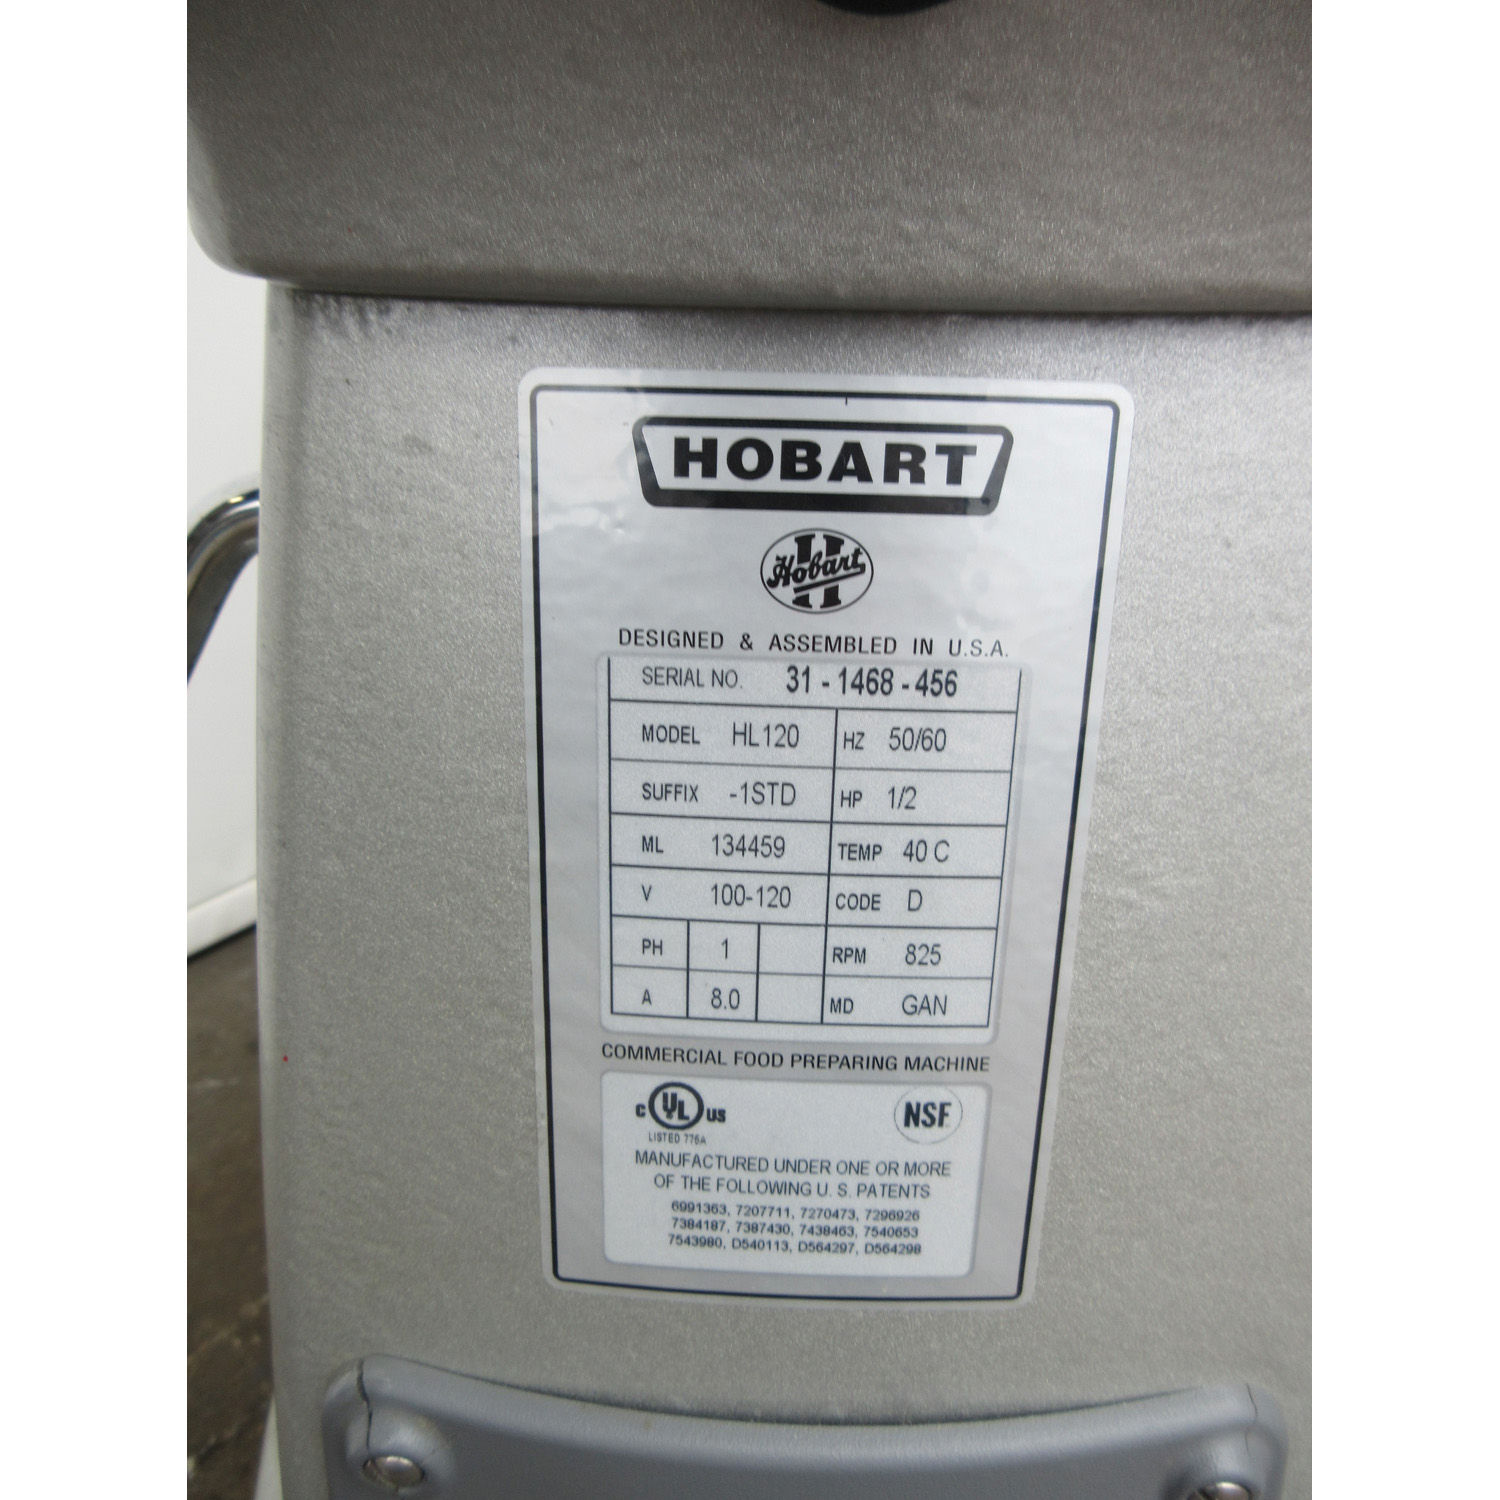 Hobart 12 Qt HL120 Legacy Mixer, Used Excellent Condition image 3